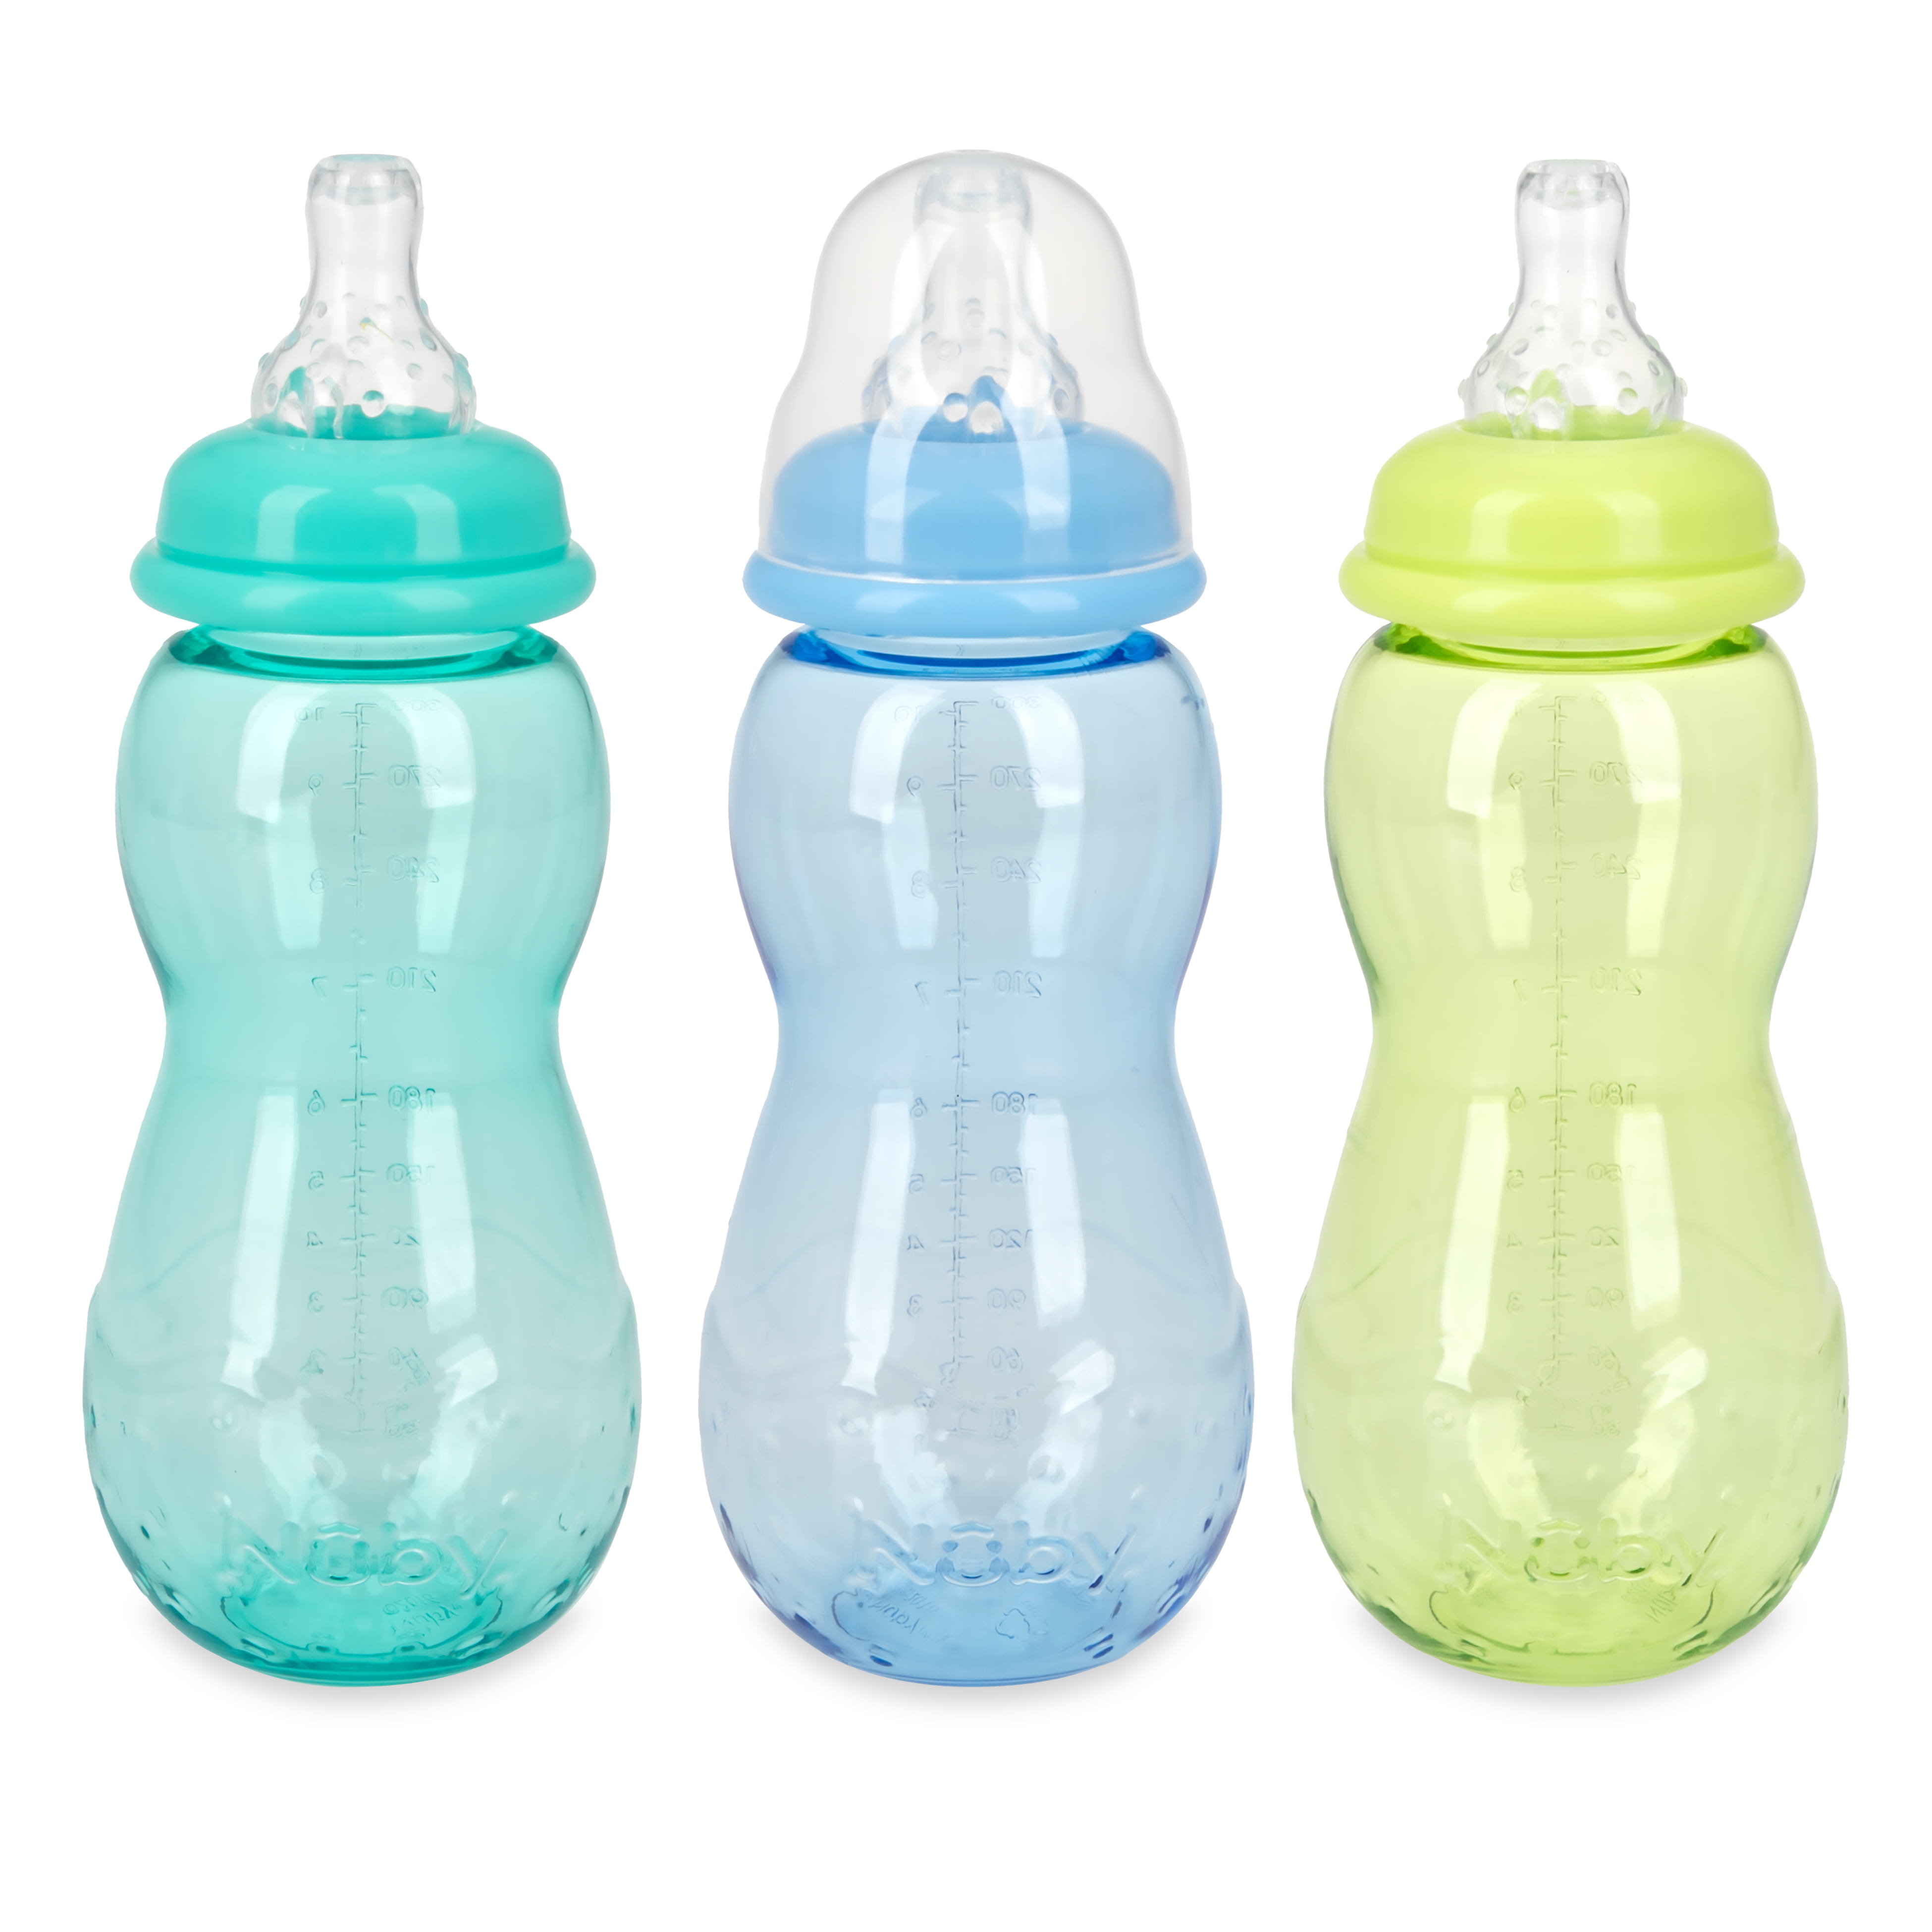 Tommee Tippee Closer to Nature Baby Bottles 9oz, 2 Count, Anti